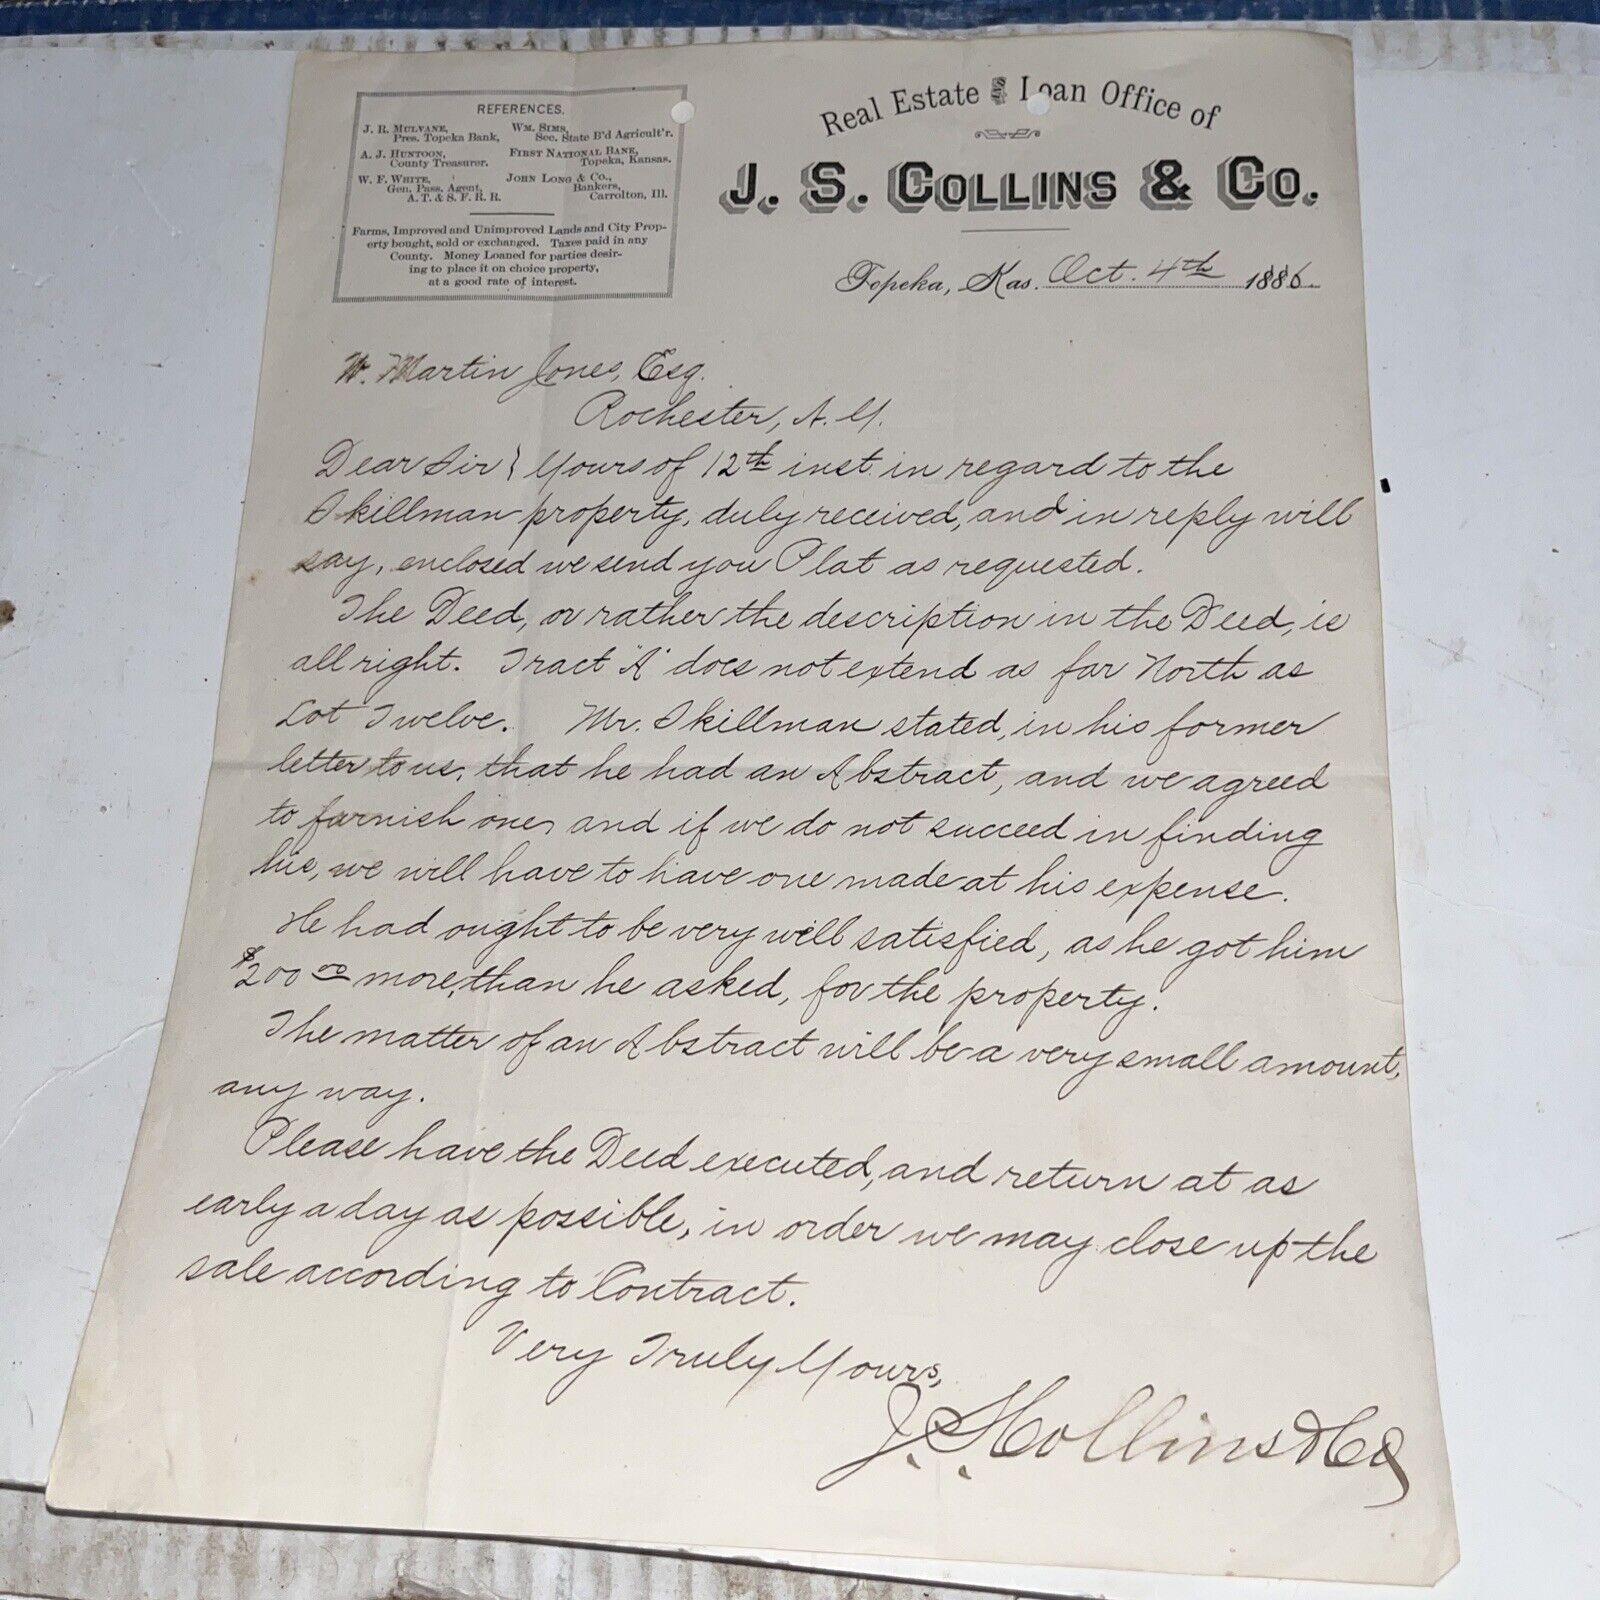 Antique 1886 Real Estate Letter on the Stillman Property - Rochester NY New York